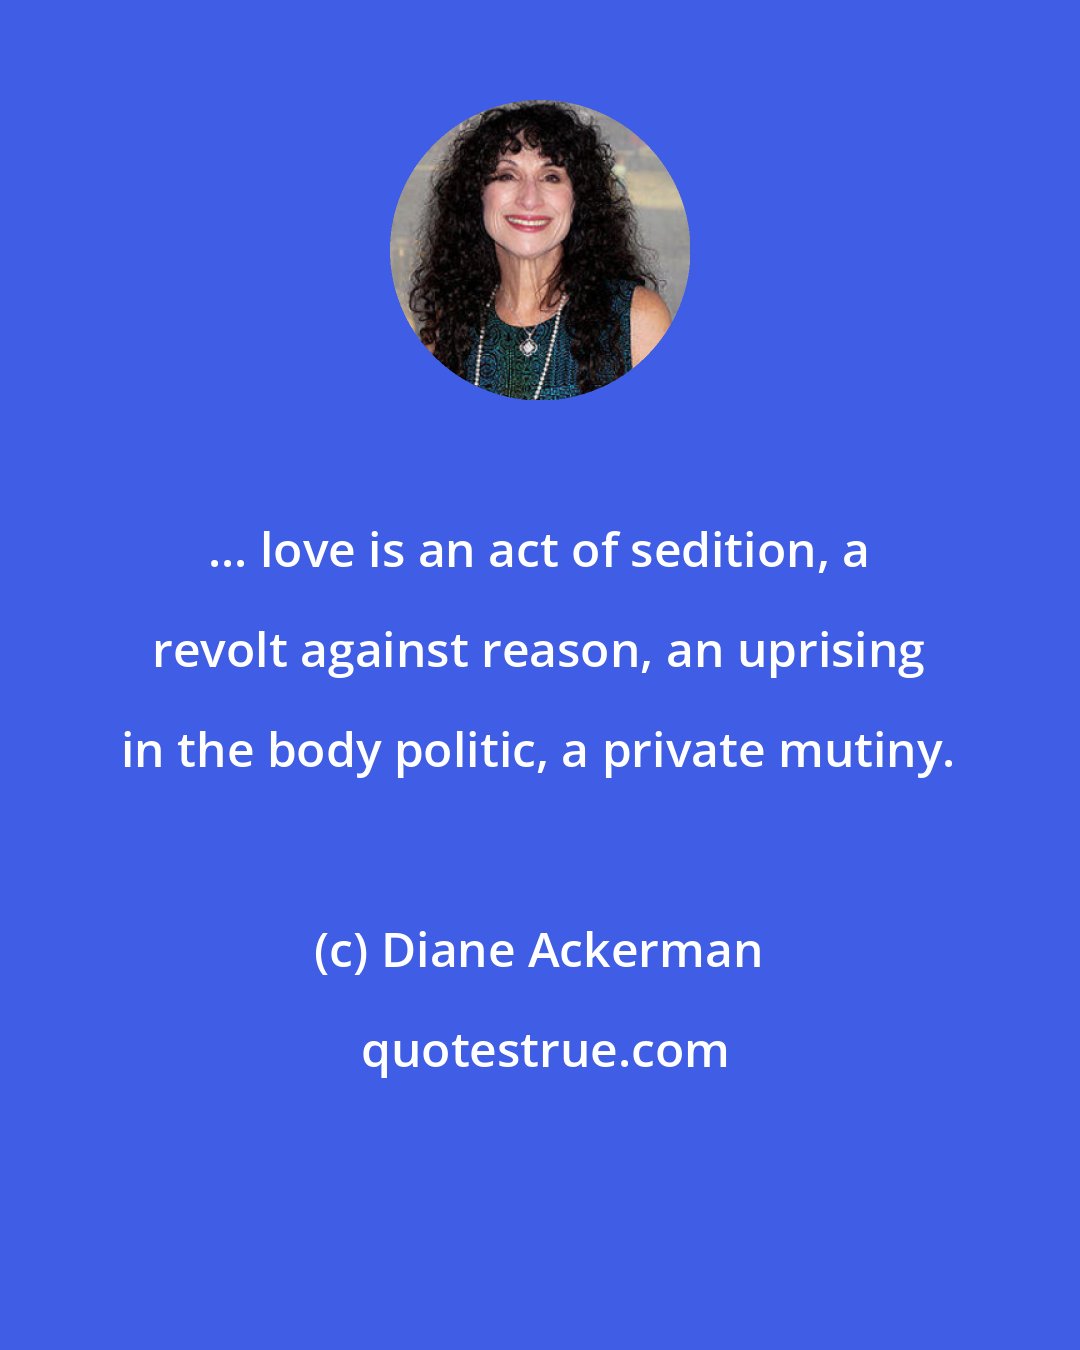 Diane Ackerman: ... love is an act of sedition, a revolt against reason, an uprising in the body politic, a private mutiny.